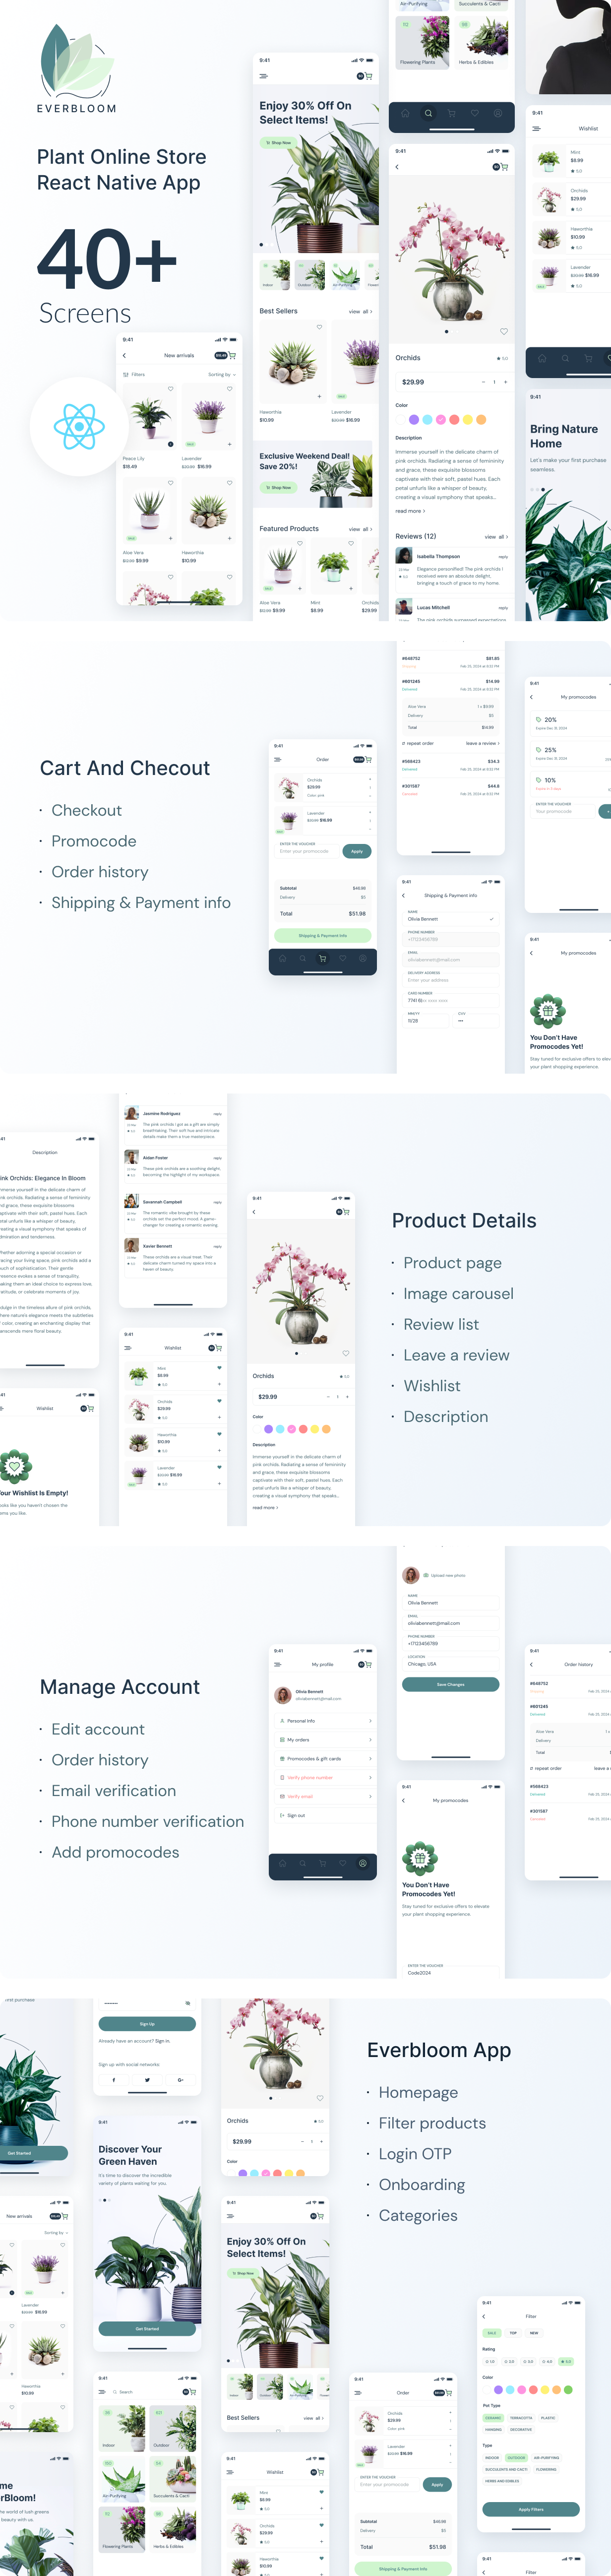 Everbloom - Plant Online Store | Expo 50.0.7 | Only Frontend - 3